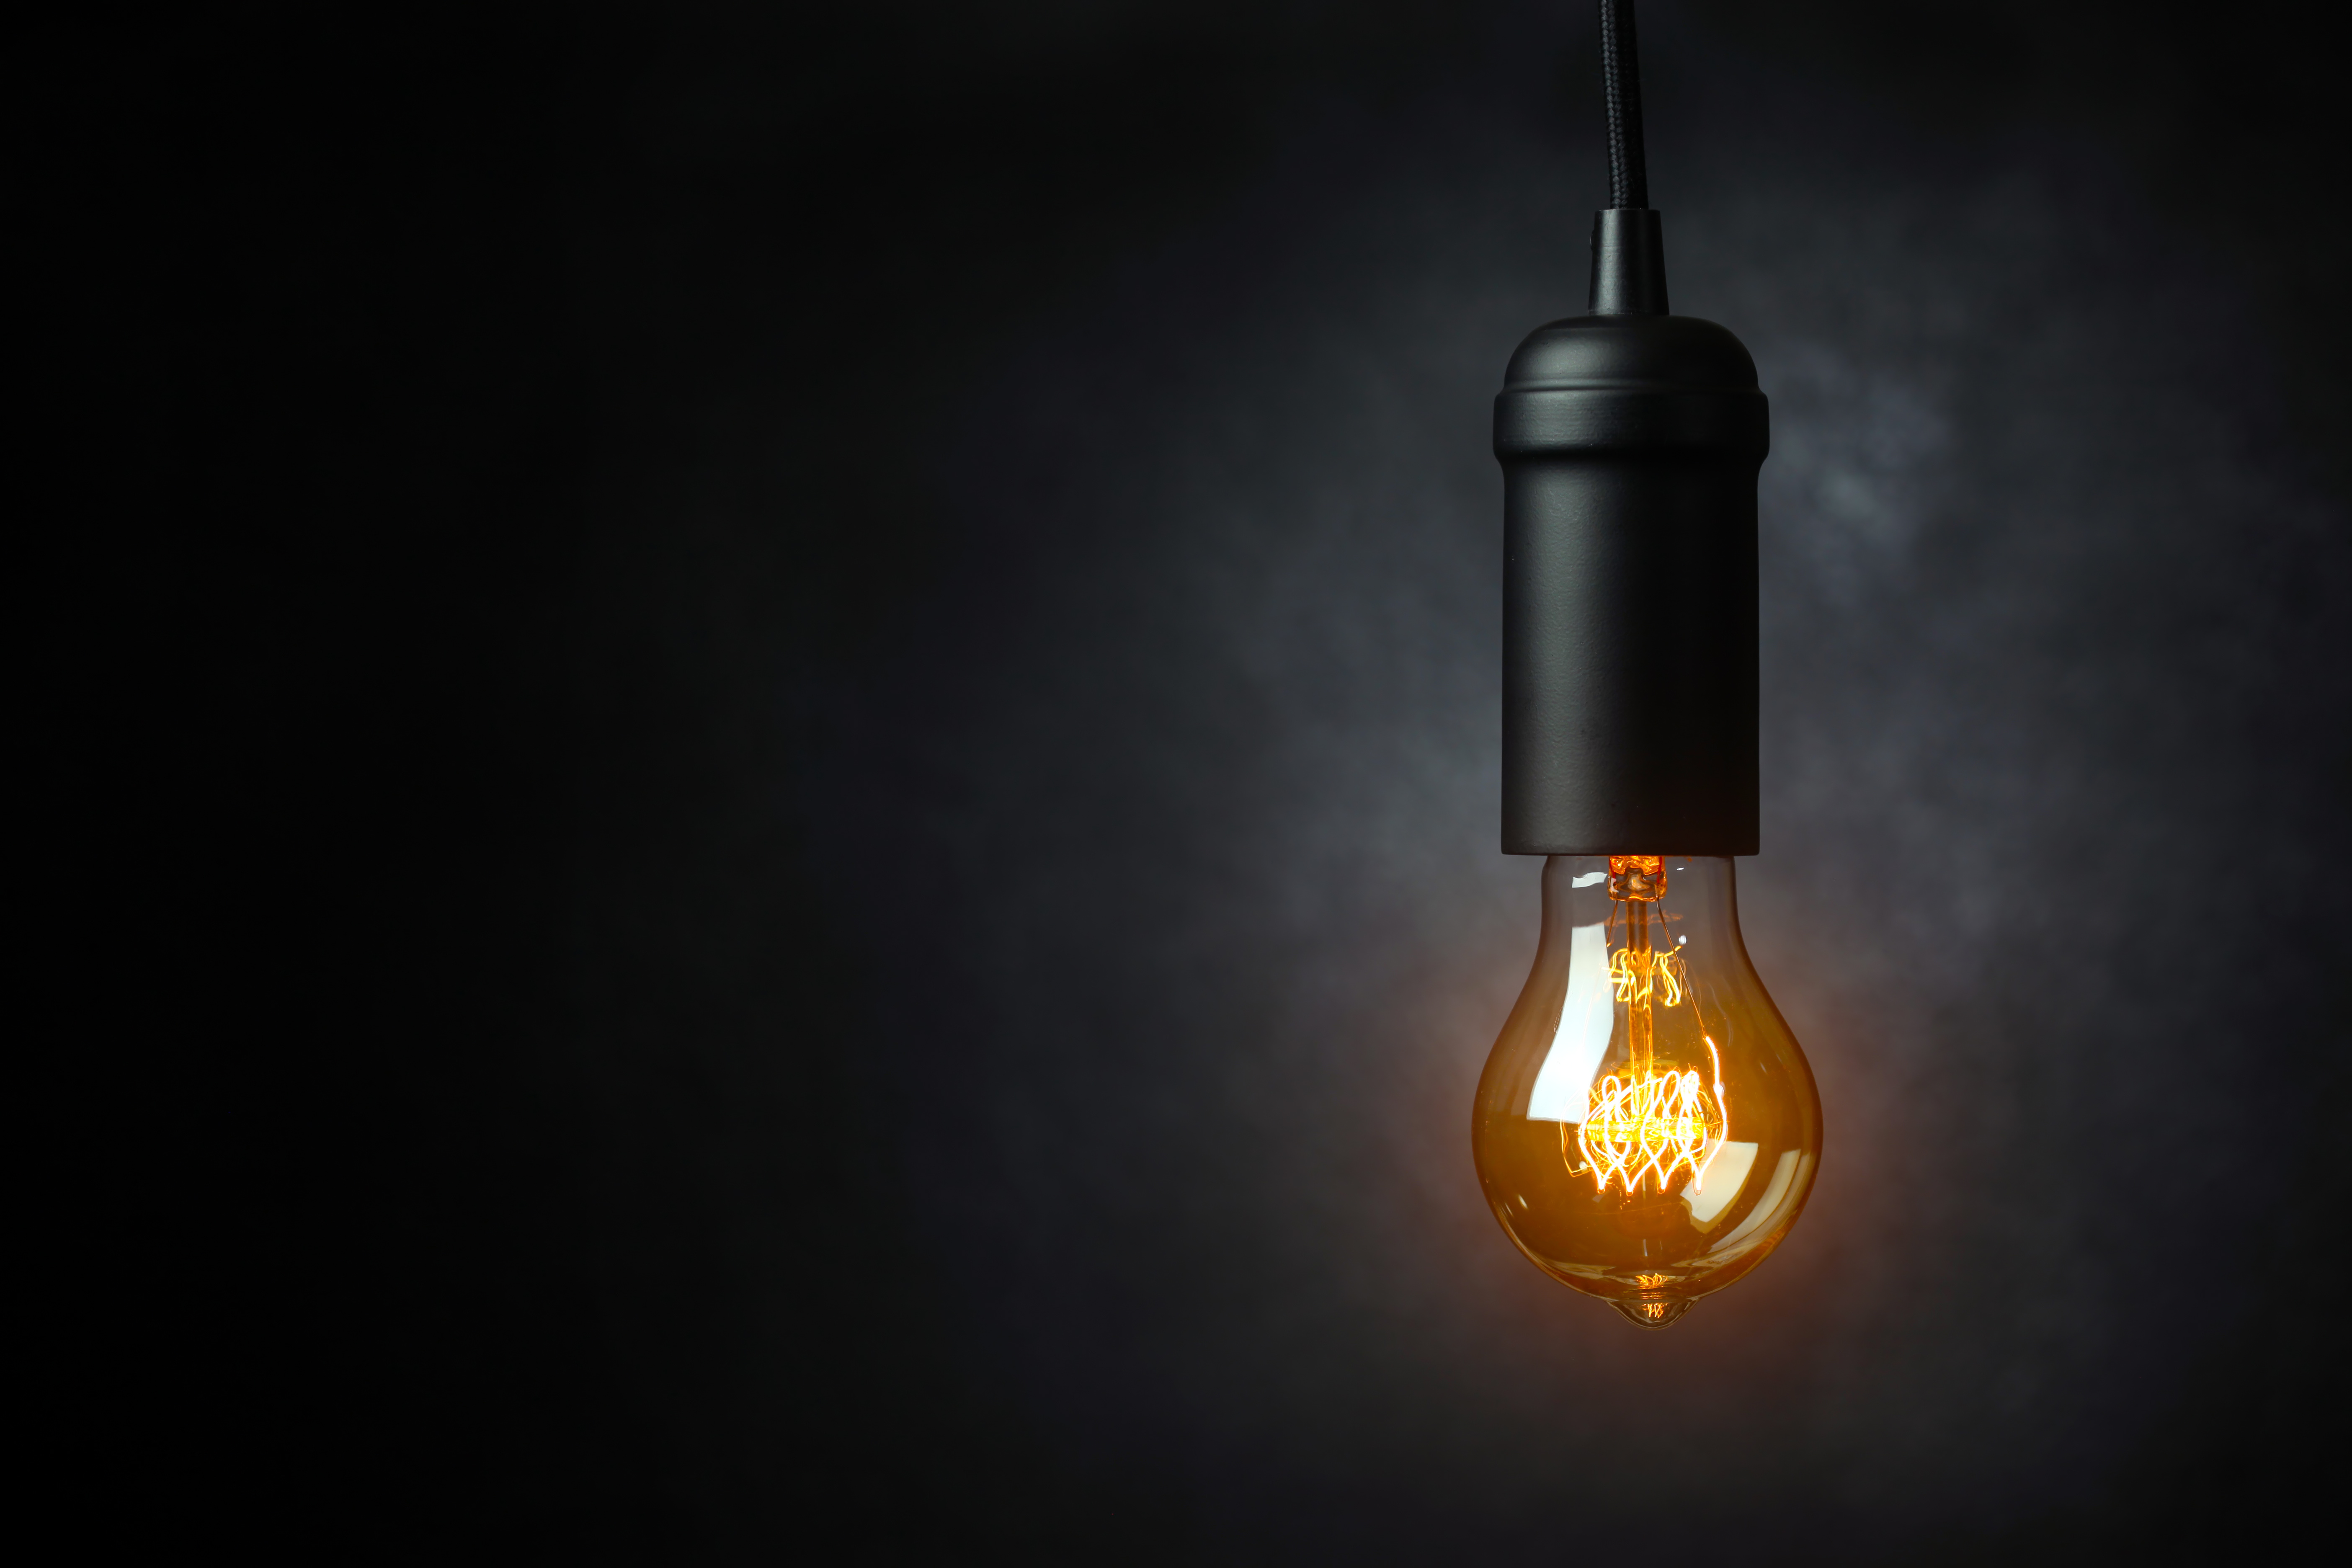 A bare incandescent lightbulb shines in front of a dark gray background.